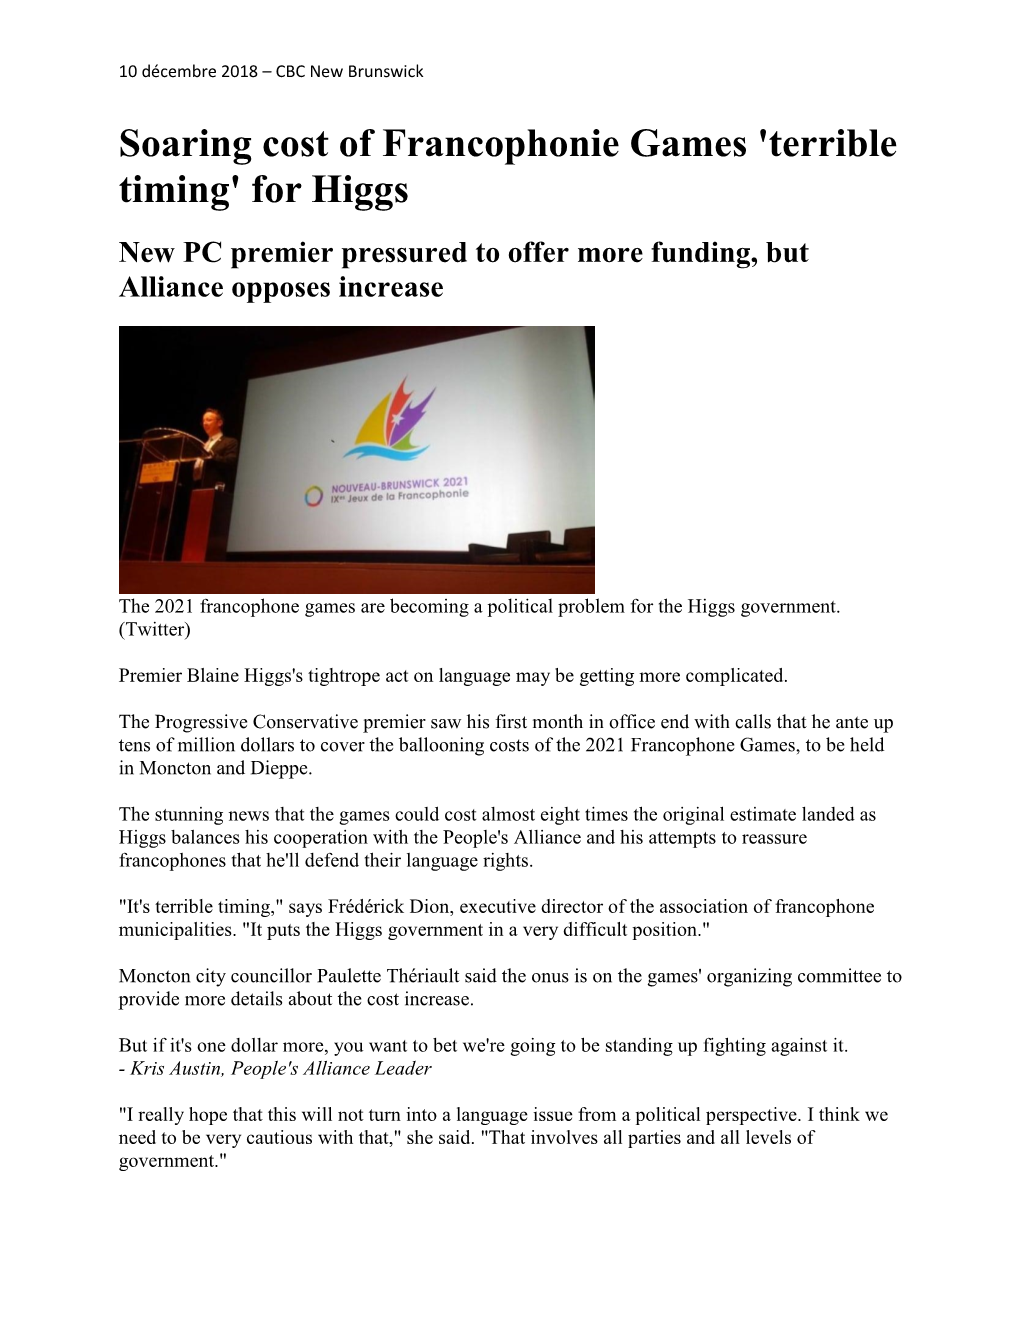 Soaring Cost of Francophonie Games 'Terrible Timing' for Higgs New PC Premier Pressured to Offer More Funding, but Alliance Opposes Increase